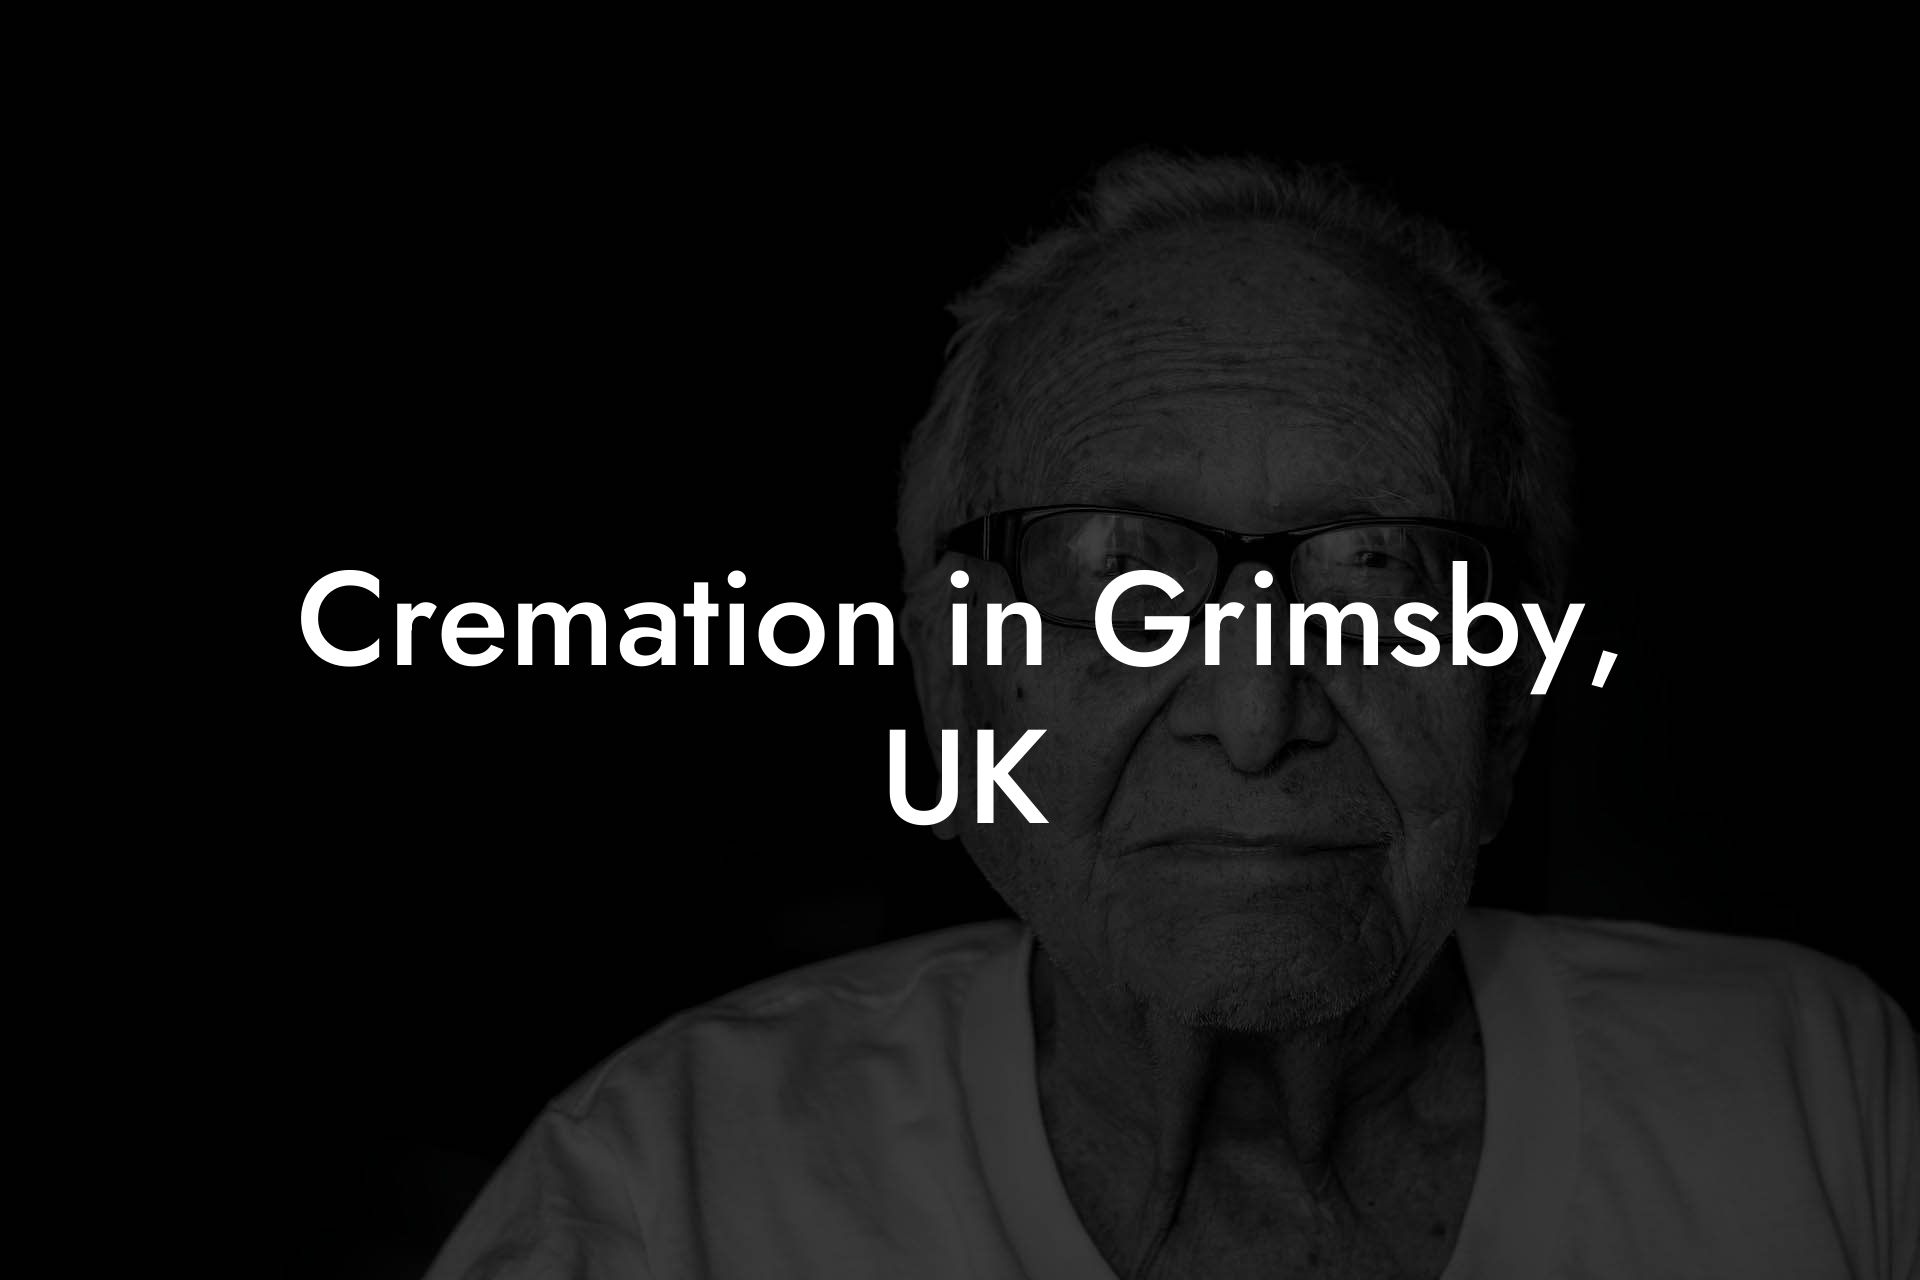 Cremation in Grimsby, UK